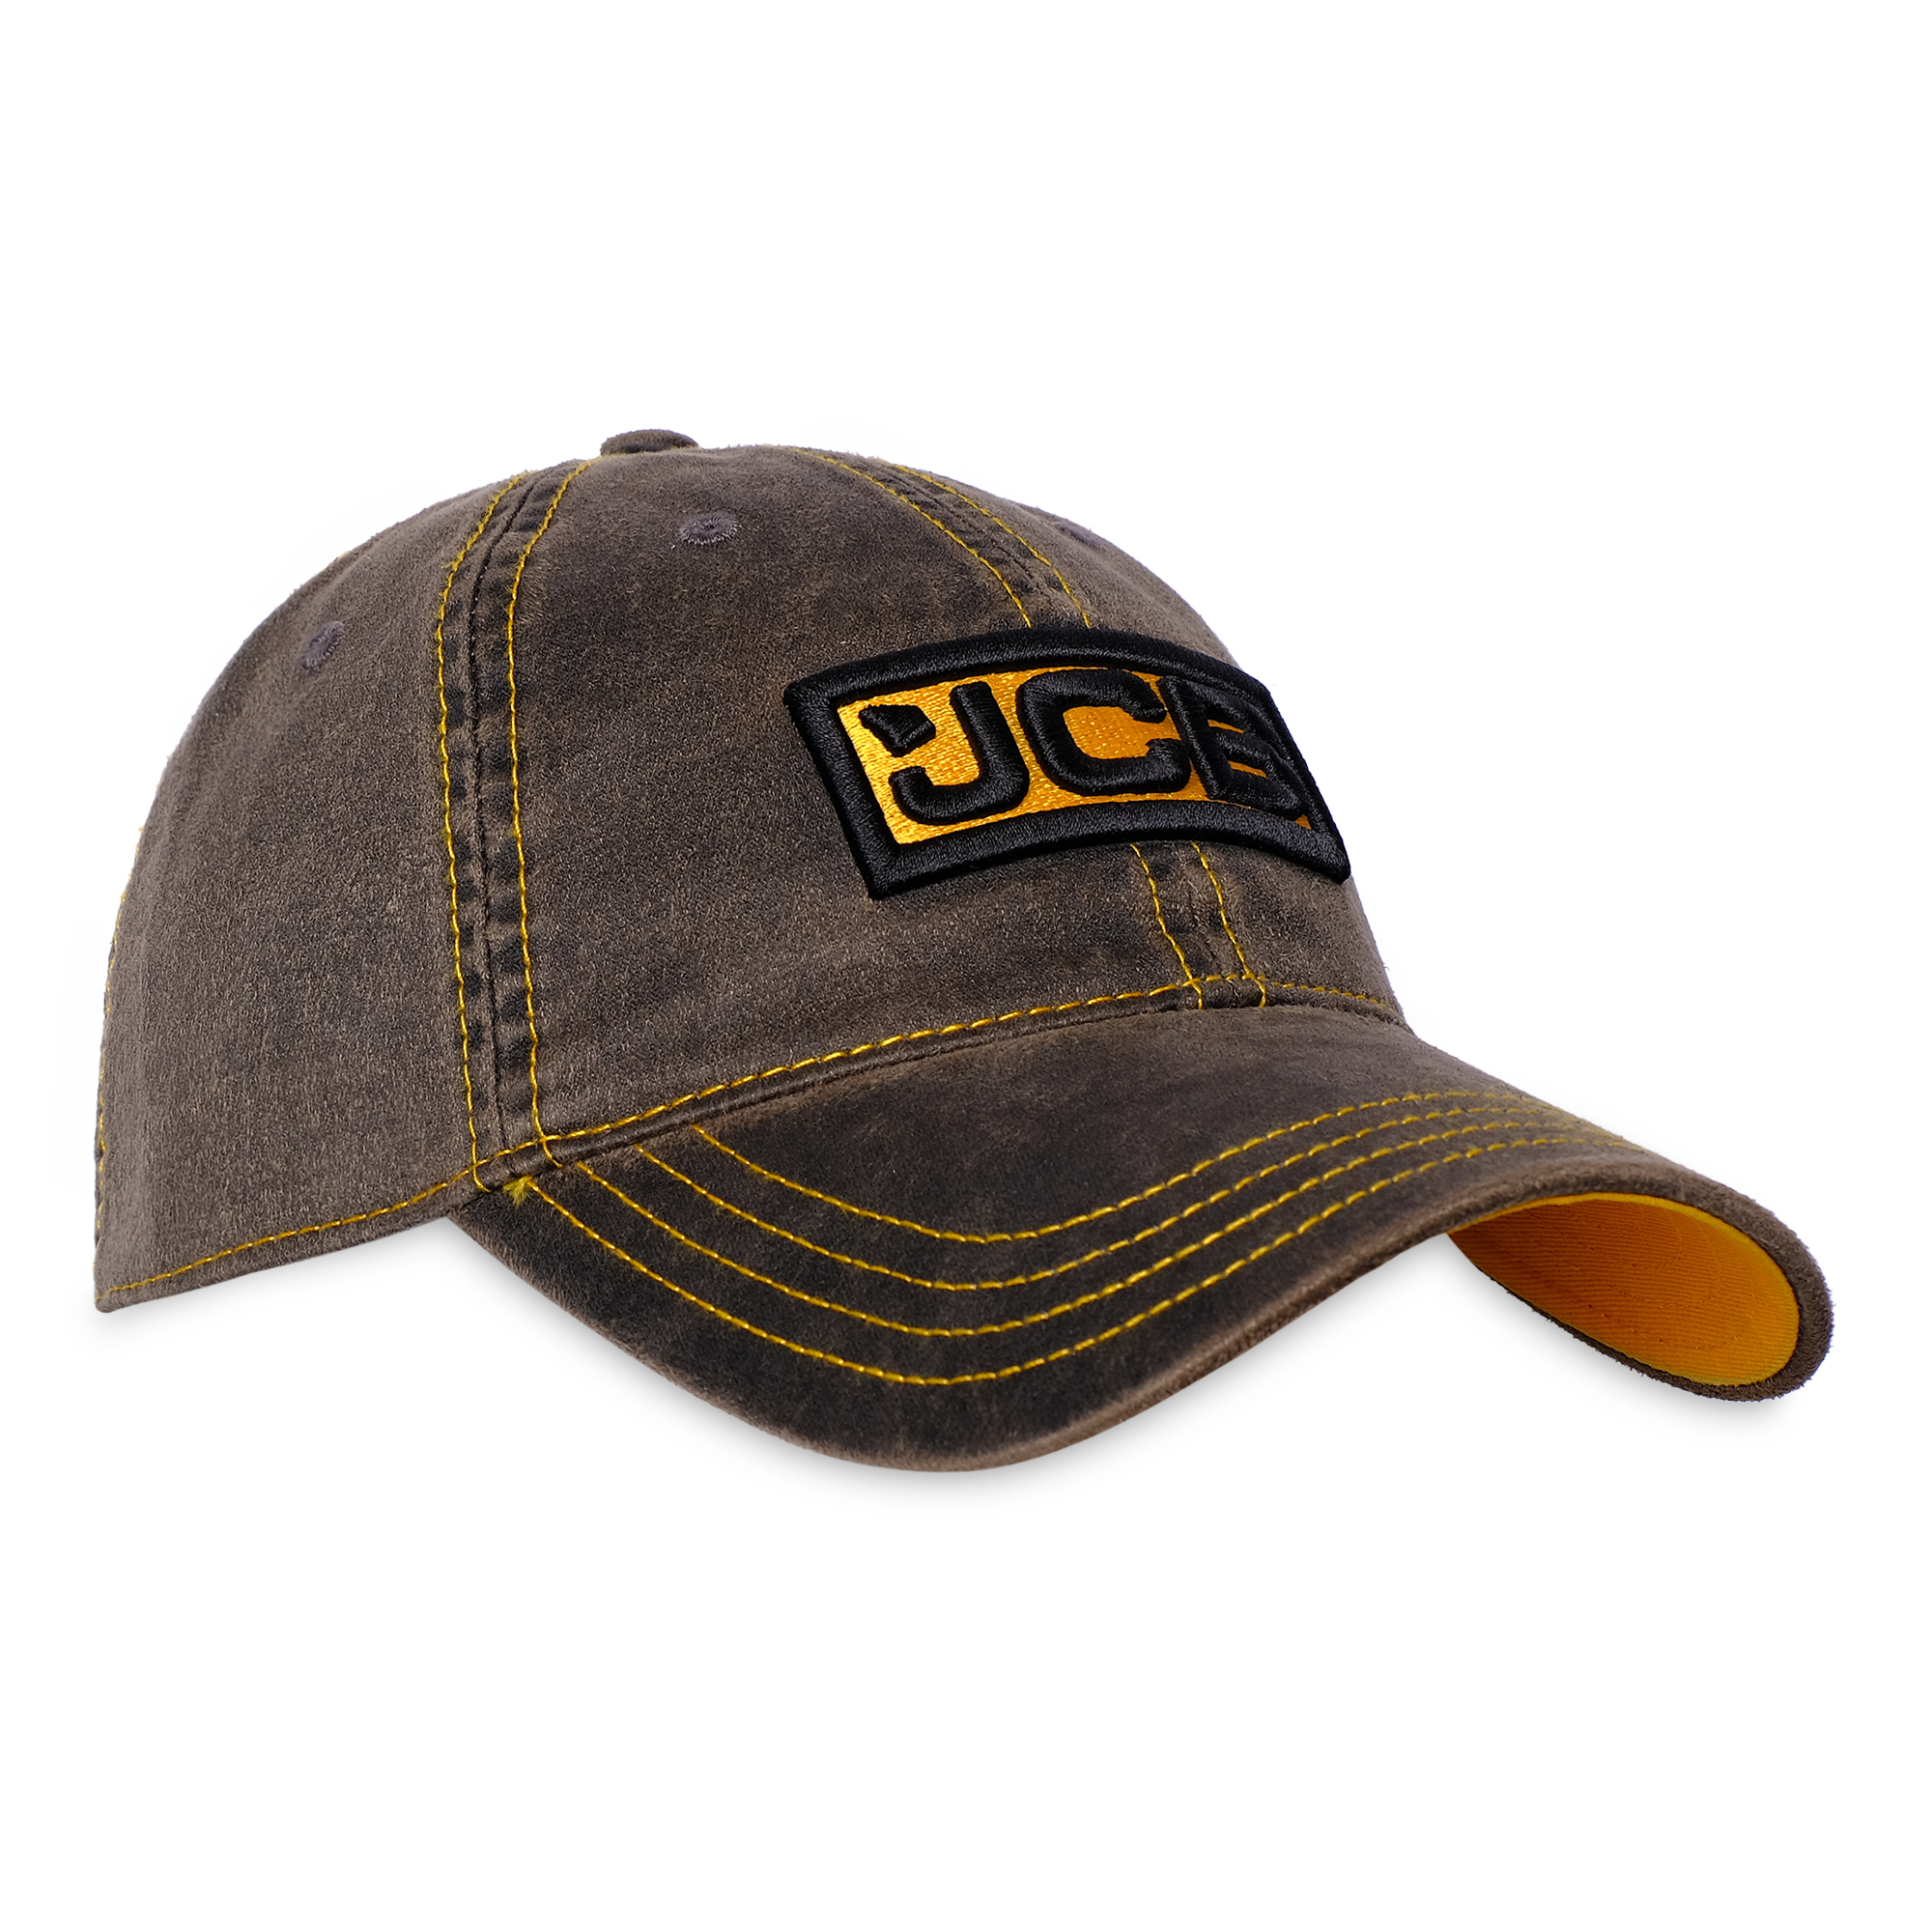 JCB Waxed Polycotton Cap – Welcome to the JCB merchandise shop India ...